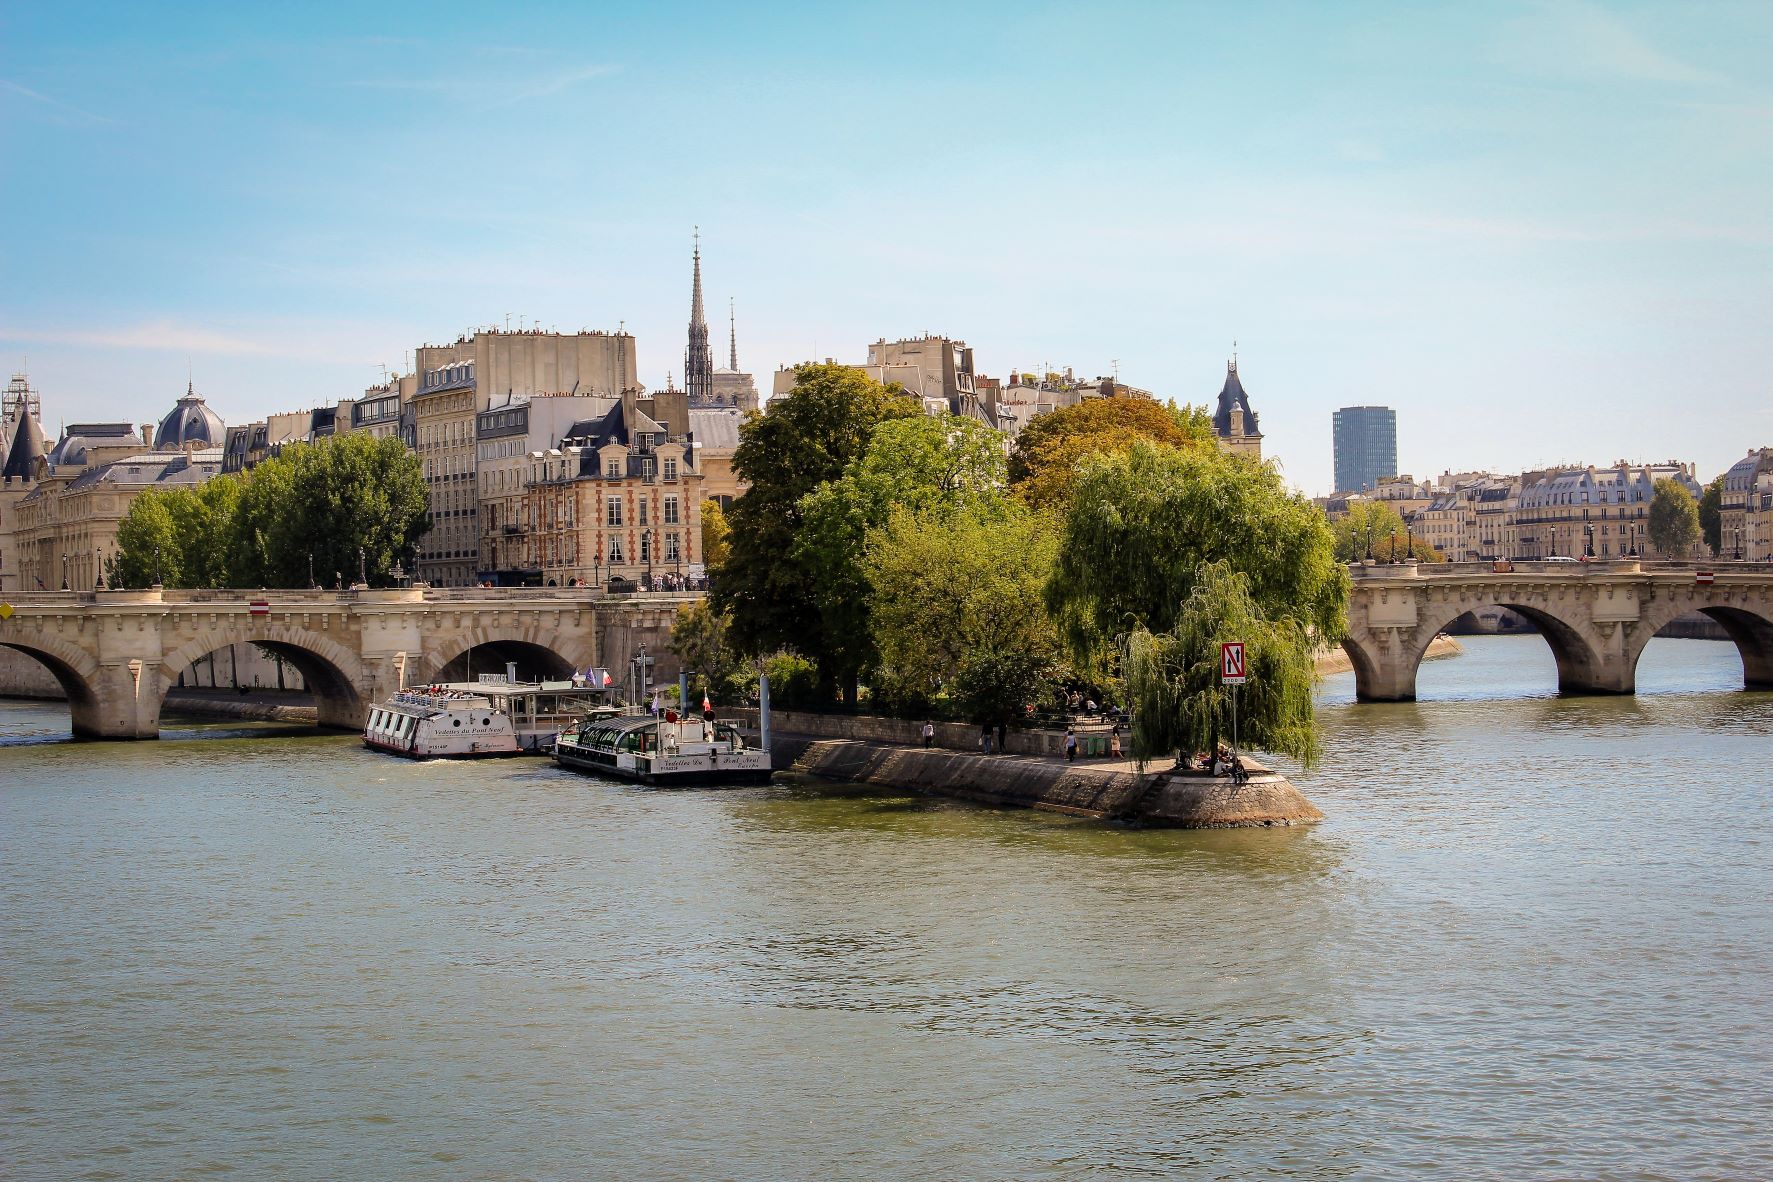 Wandering around Île Saint-Louis or Île de la Cité feels like you are taking a holiday from the rush of Paris. Both are two natural islands sitting in the middle of the Seine with the left and right banks on either side.